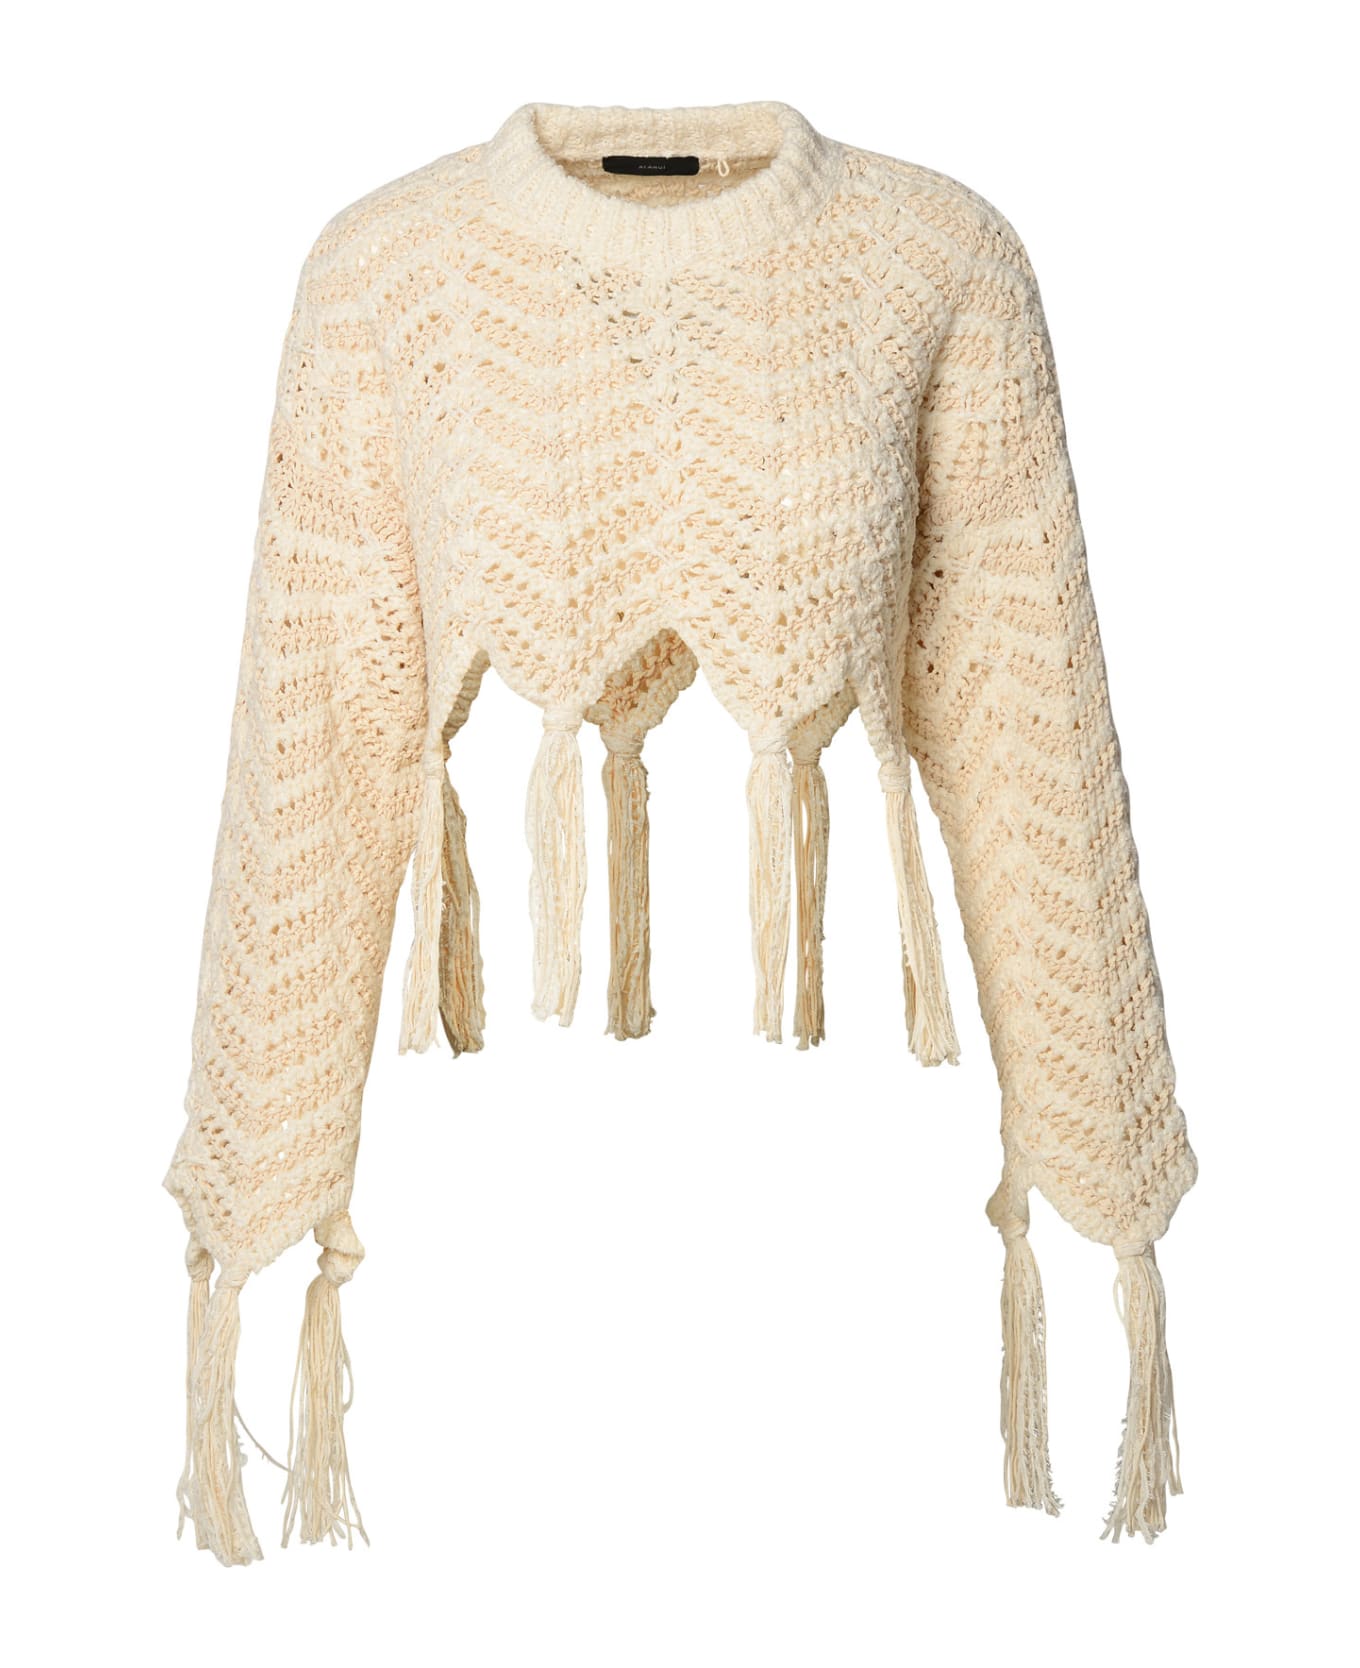 Alanui Linen Blend Cropped Sweater - Yellow Cream